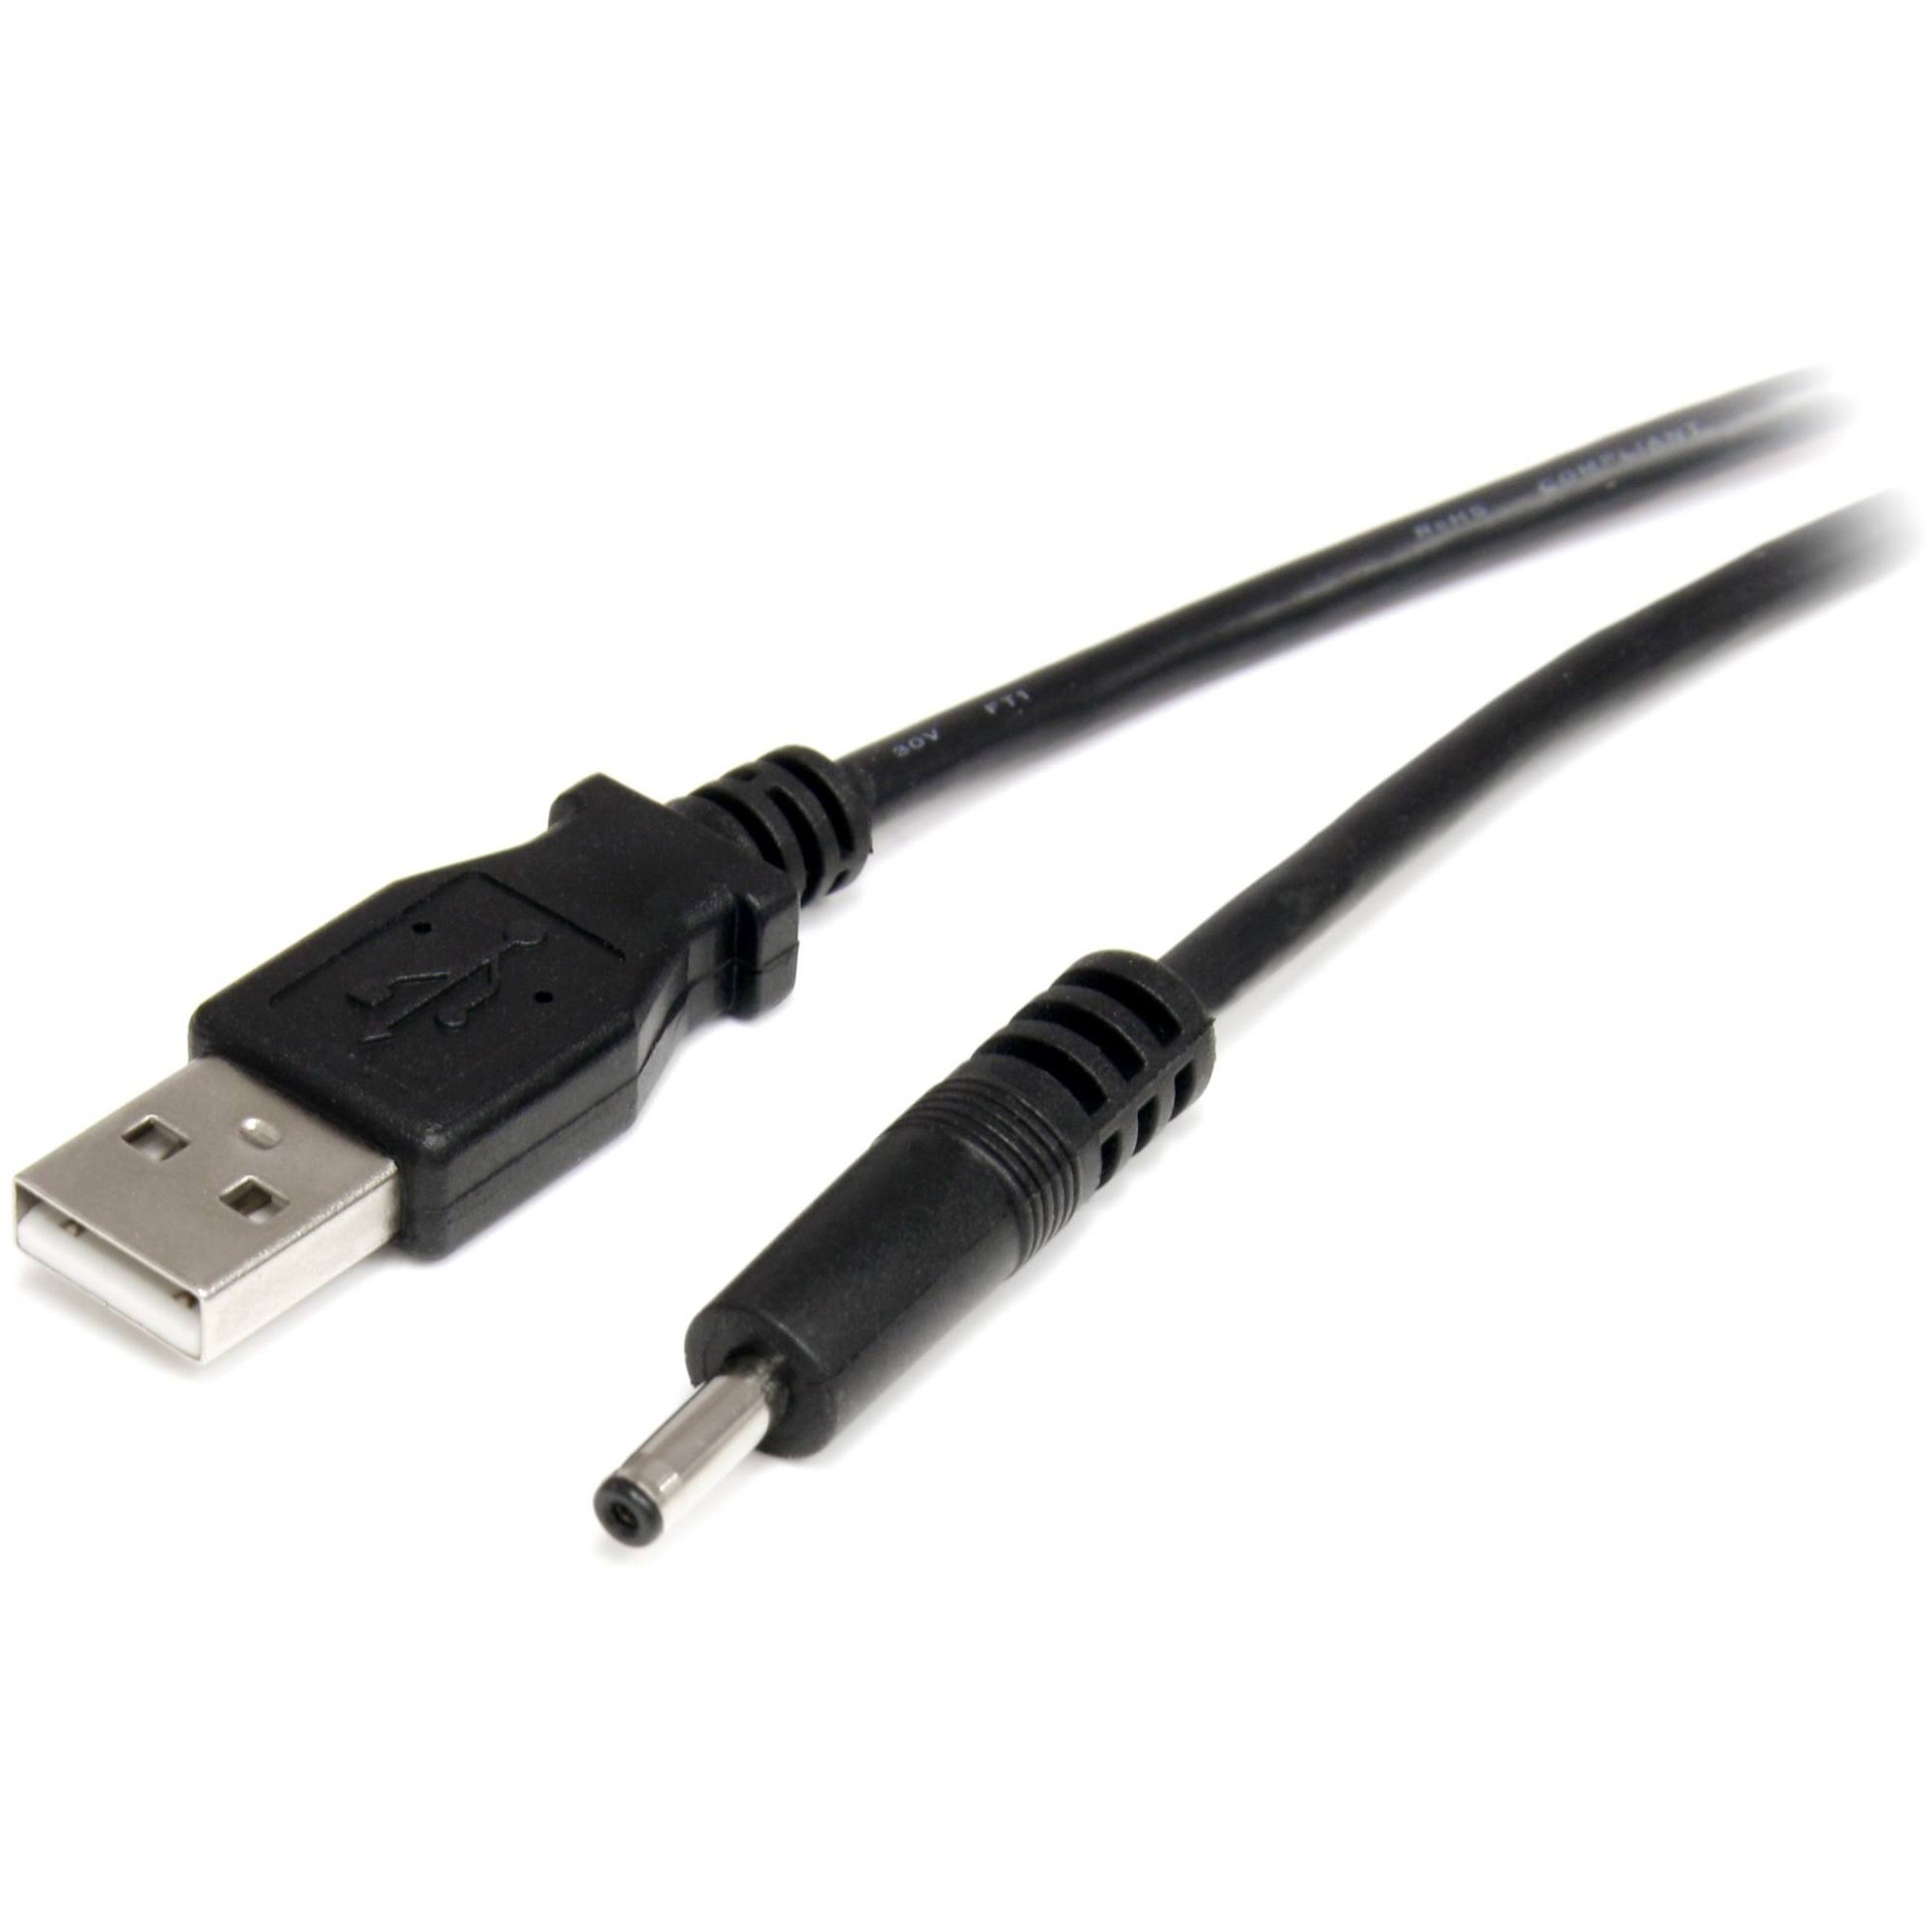 Startech Usb Power Cable - 3.4mm, Type H Barrel, 5V